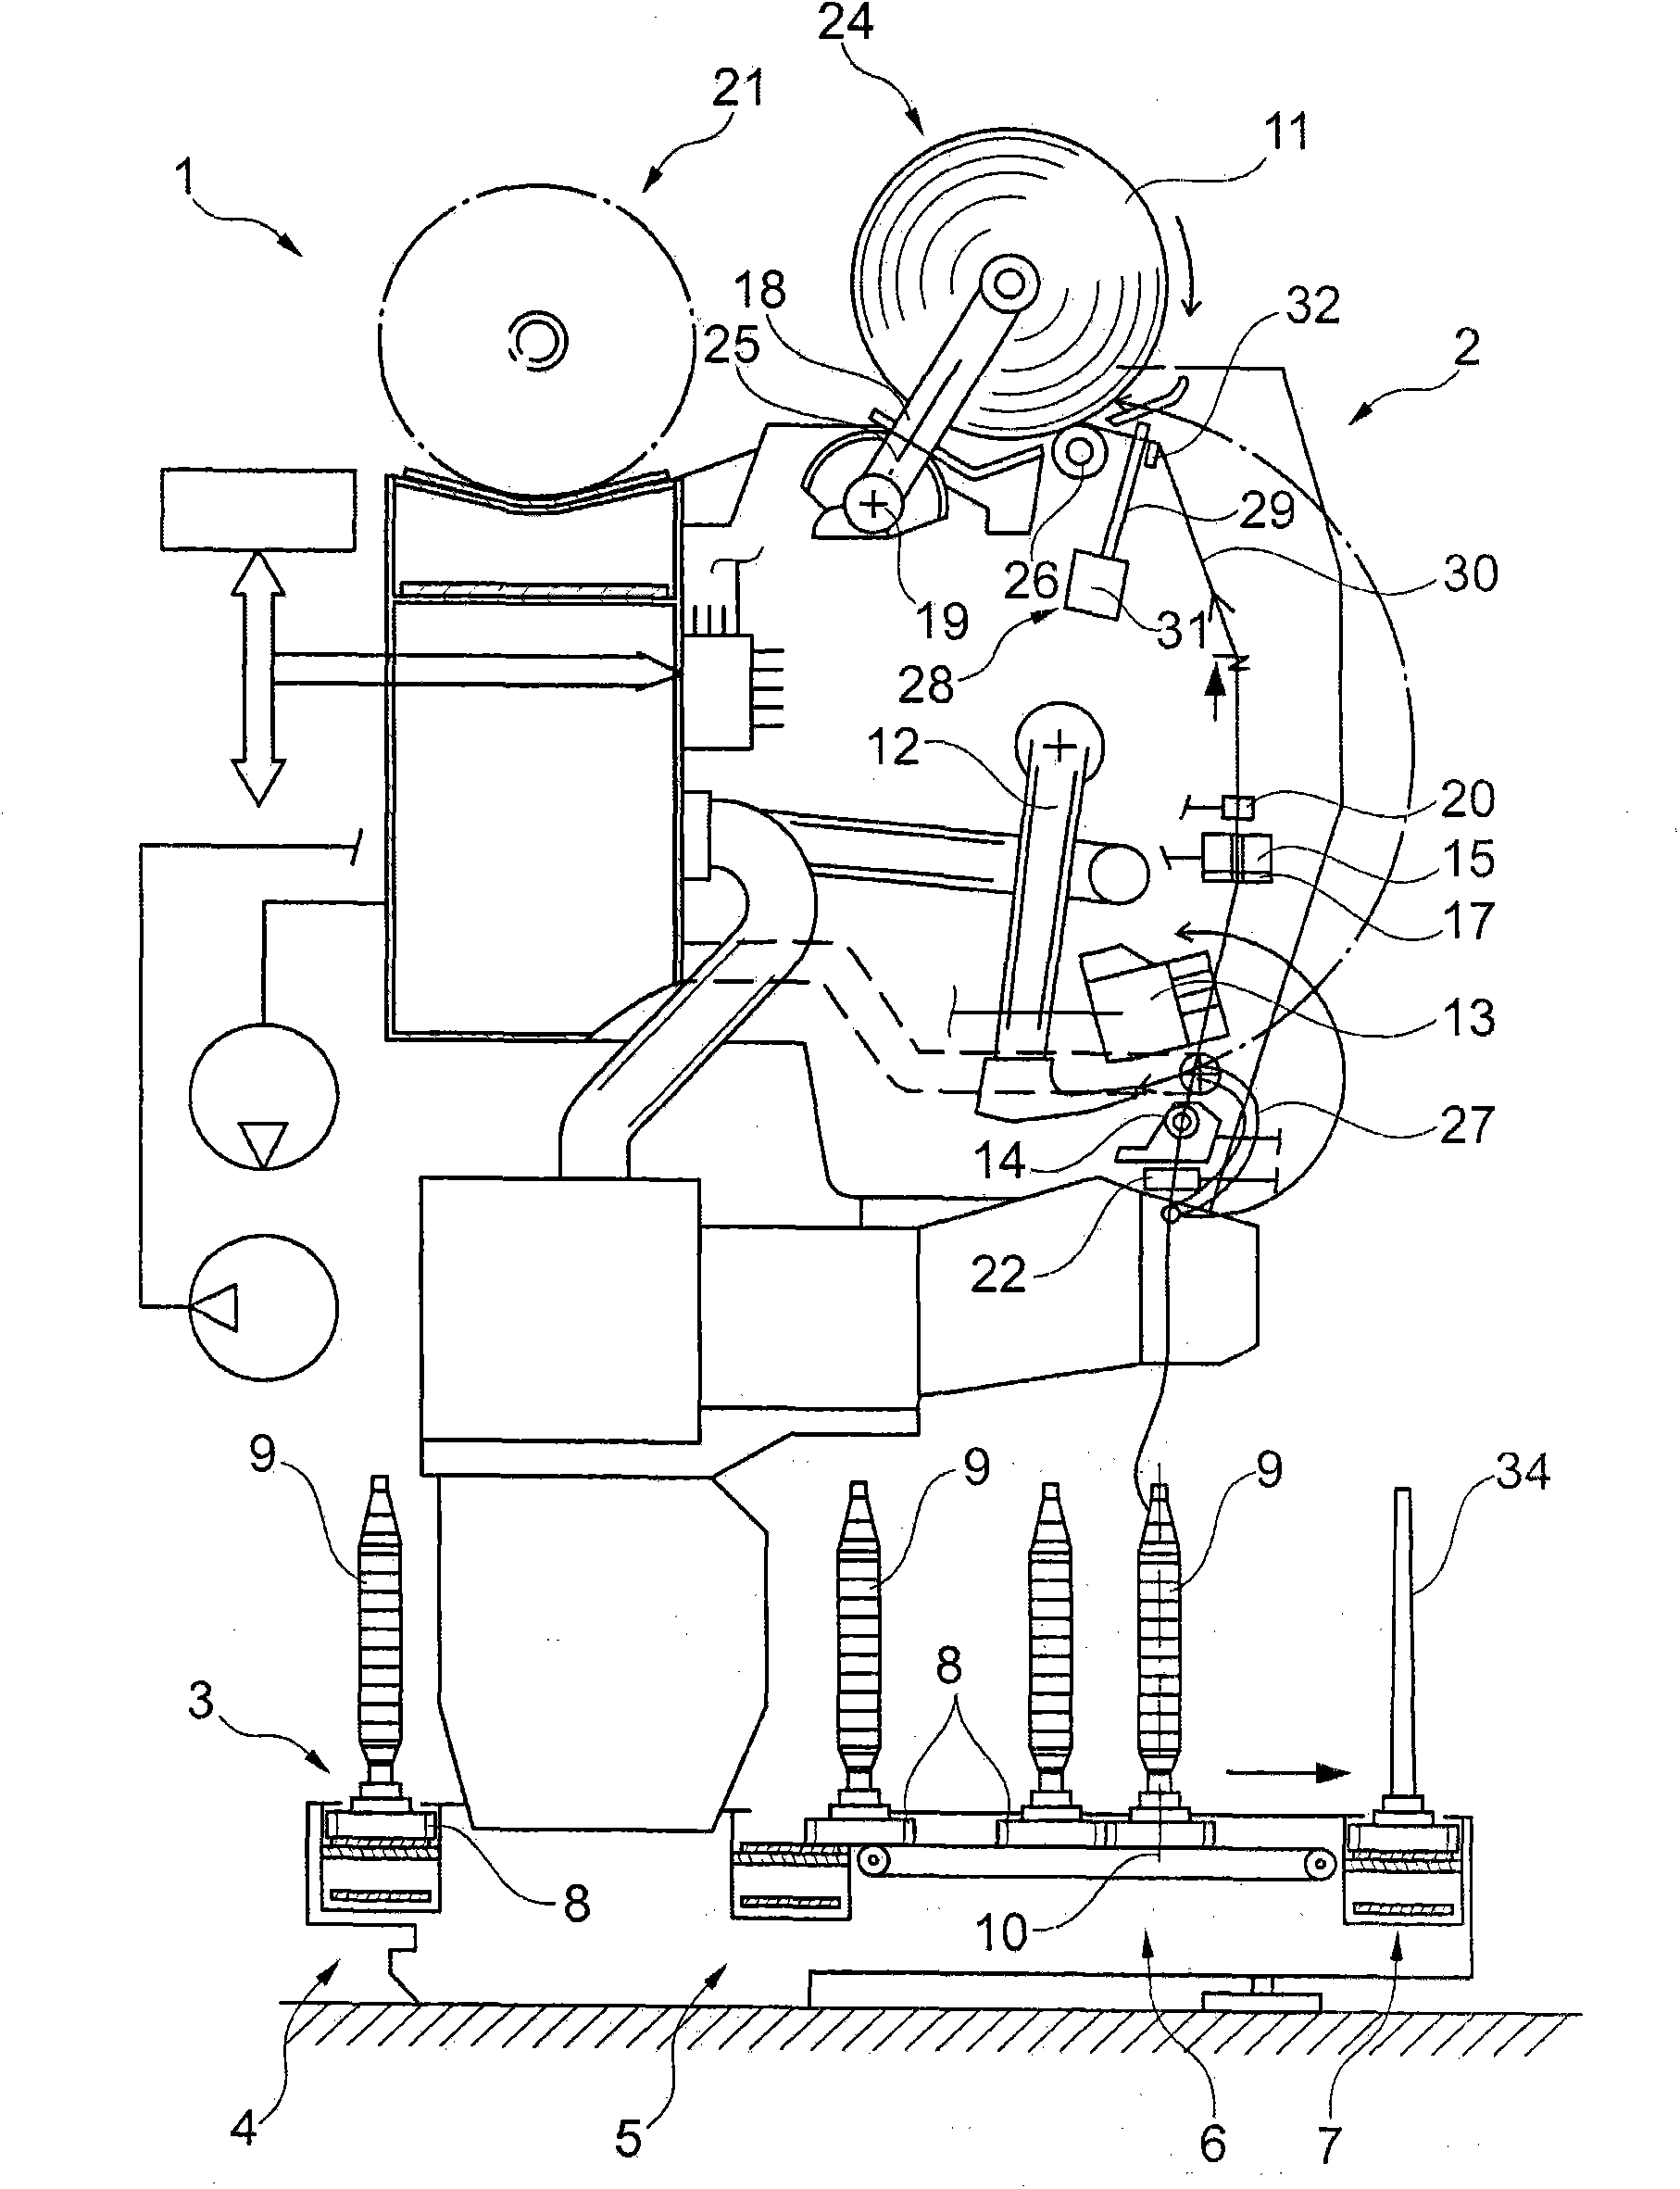 Method for manufacturing dye bobbin in the form of cross-wound spool